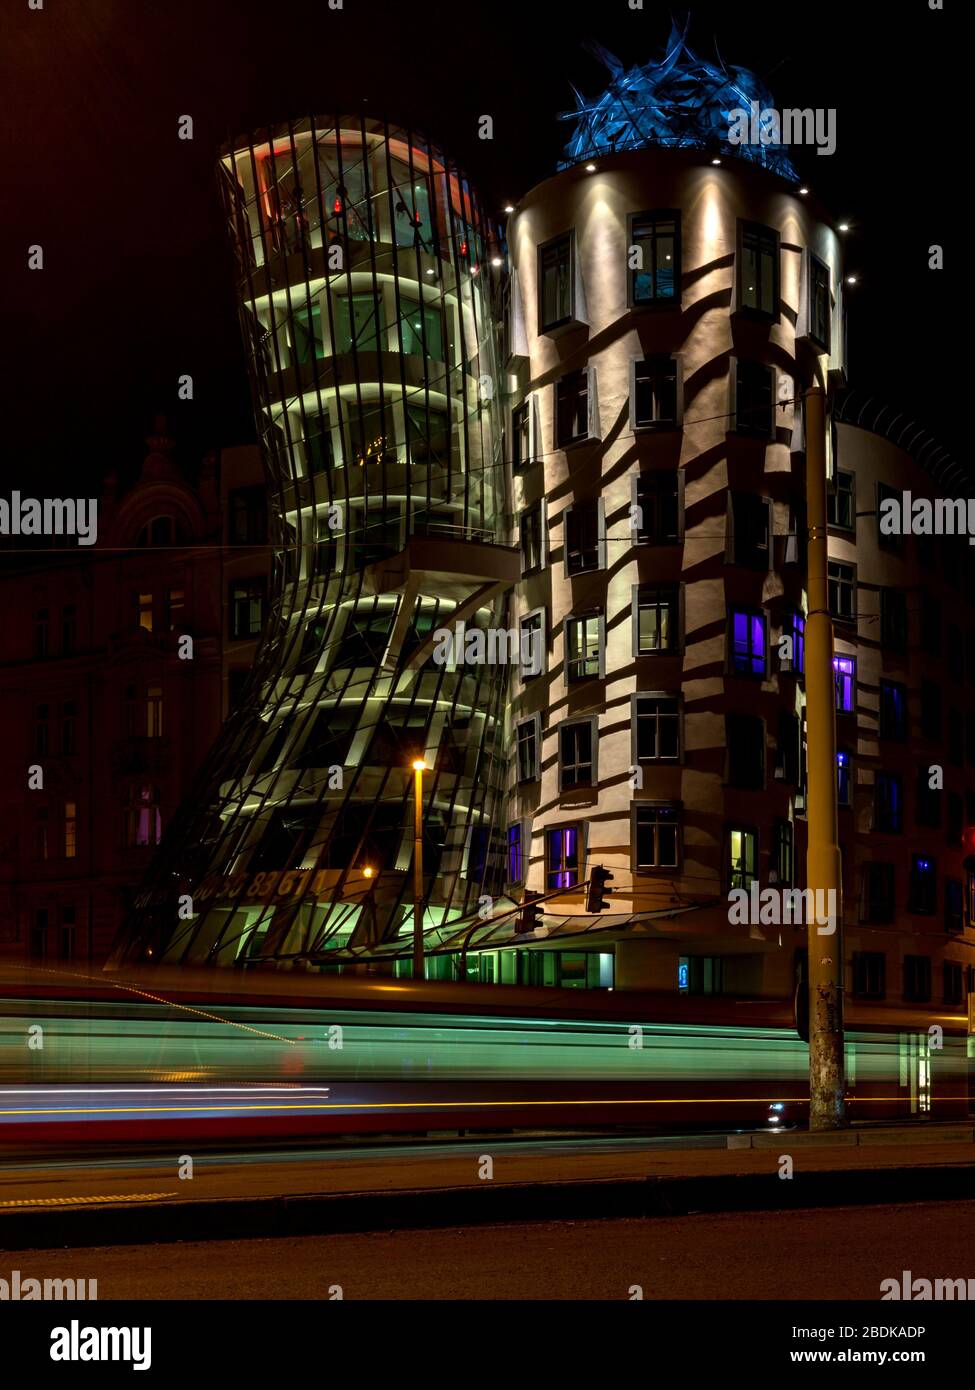 Light trails in front of the lit Dancing House building in Prague at night. The building was designed by the Croatian-Czech architect Vlado Milunic. Stock Photo